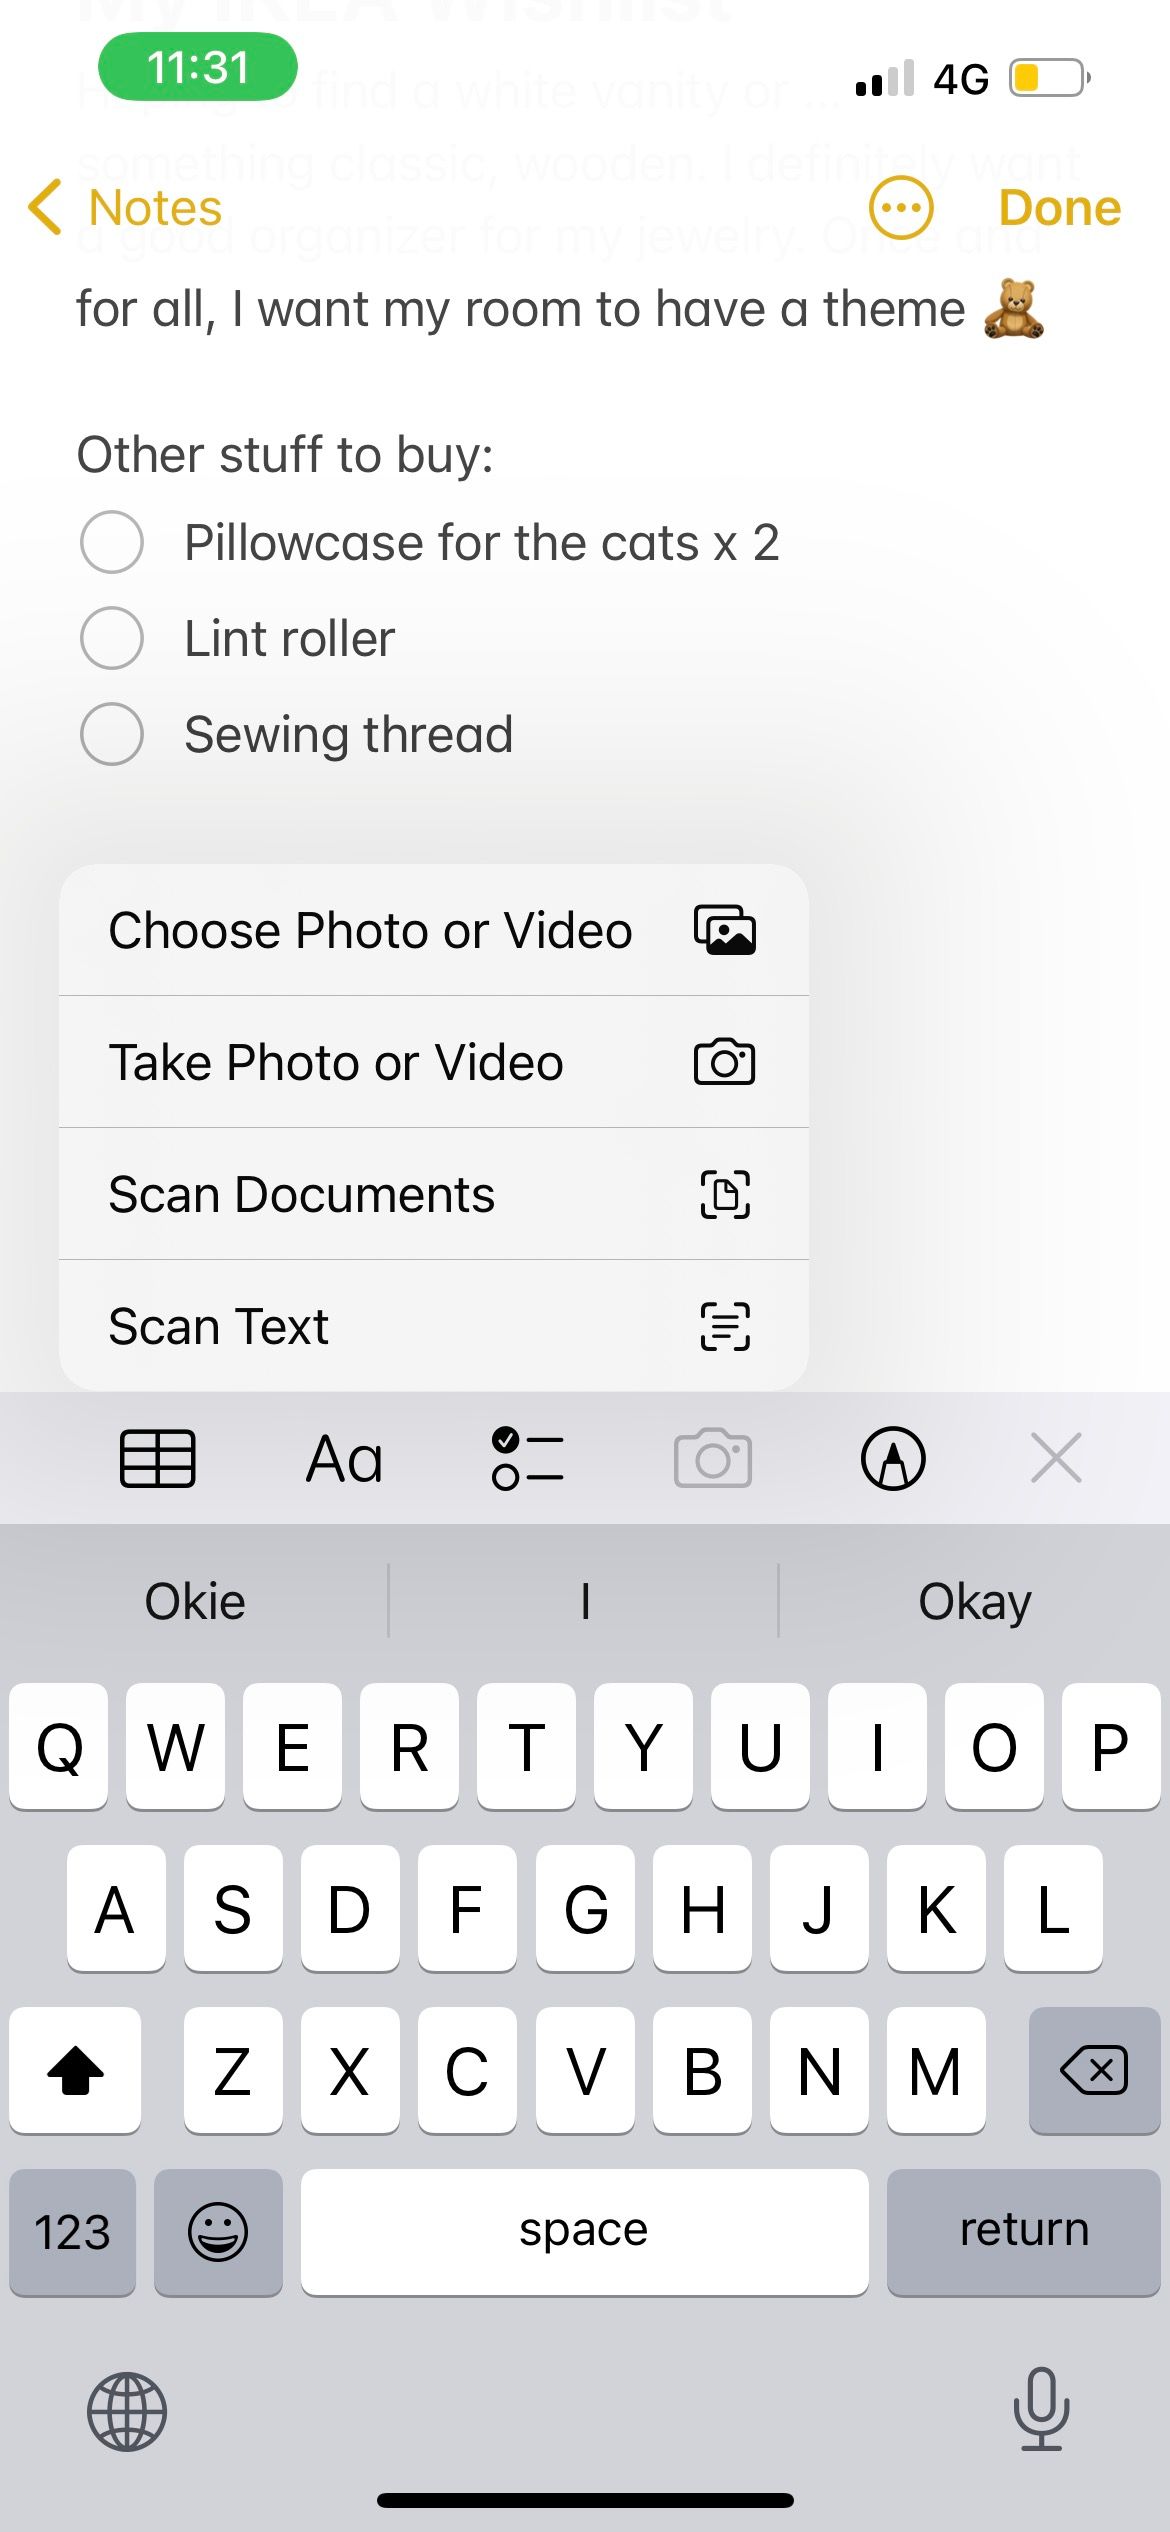 photo and video options in iphone notes app